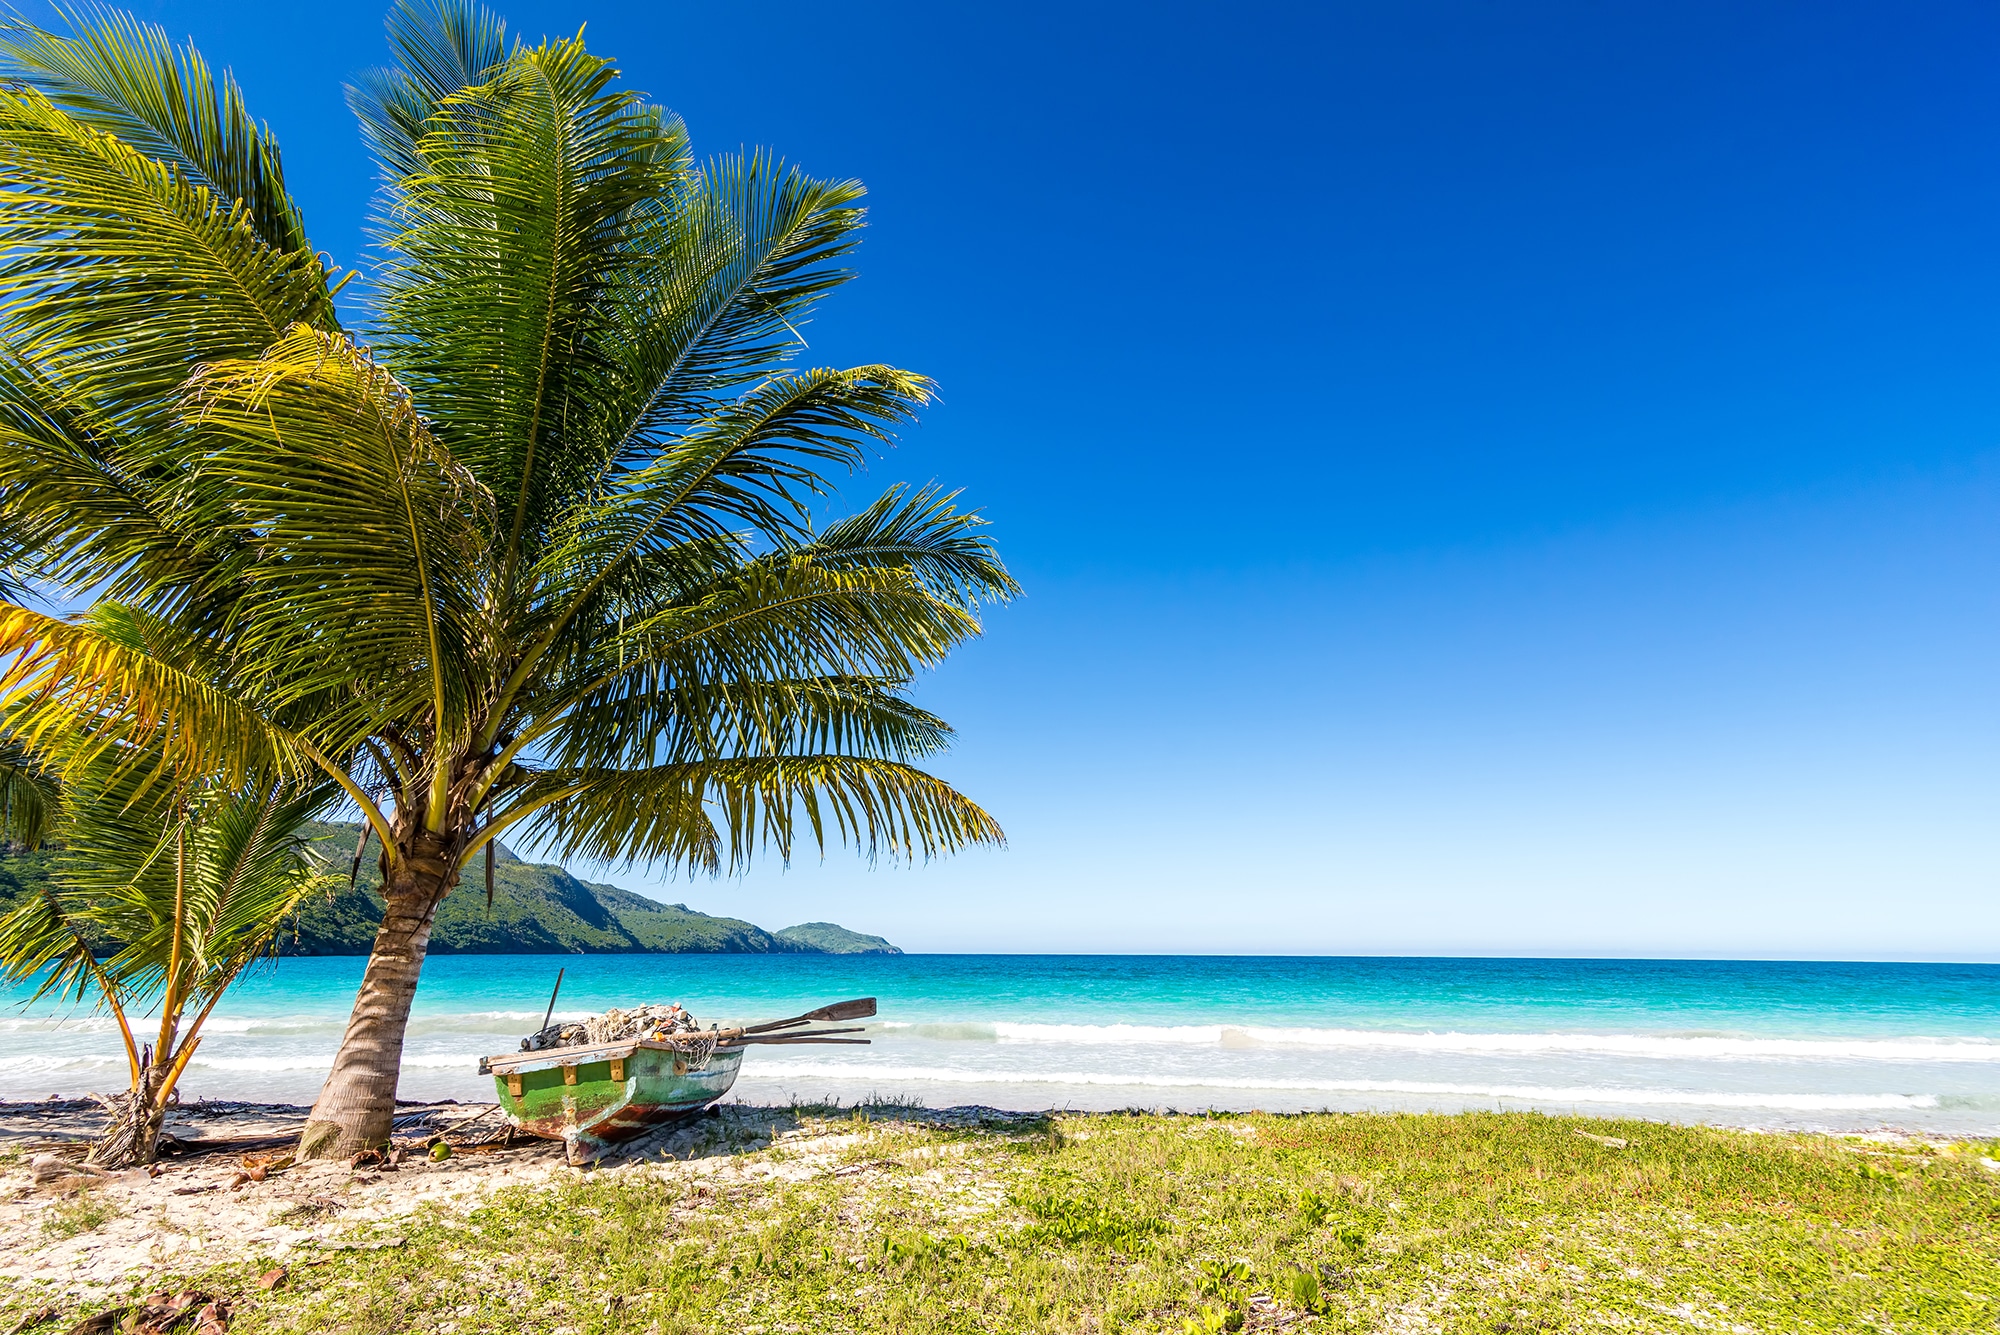 Best Islands to Live On: Dominican Republic